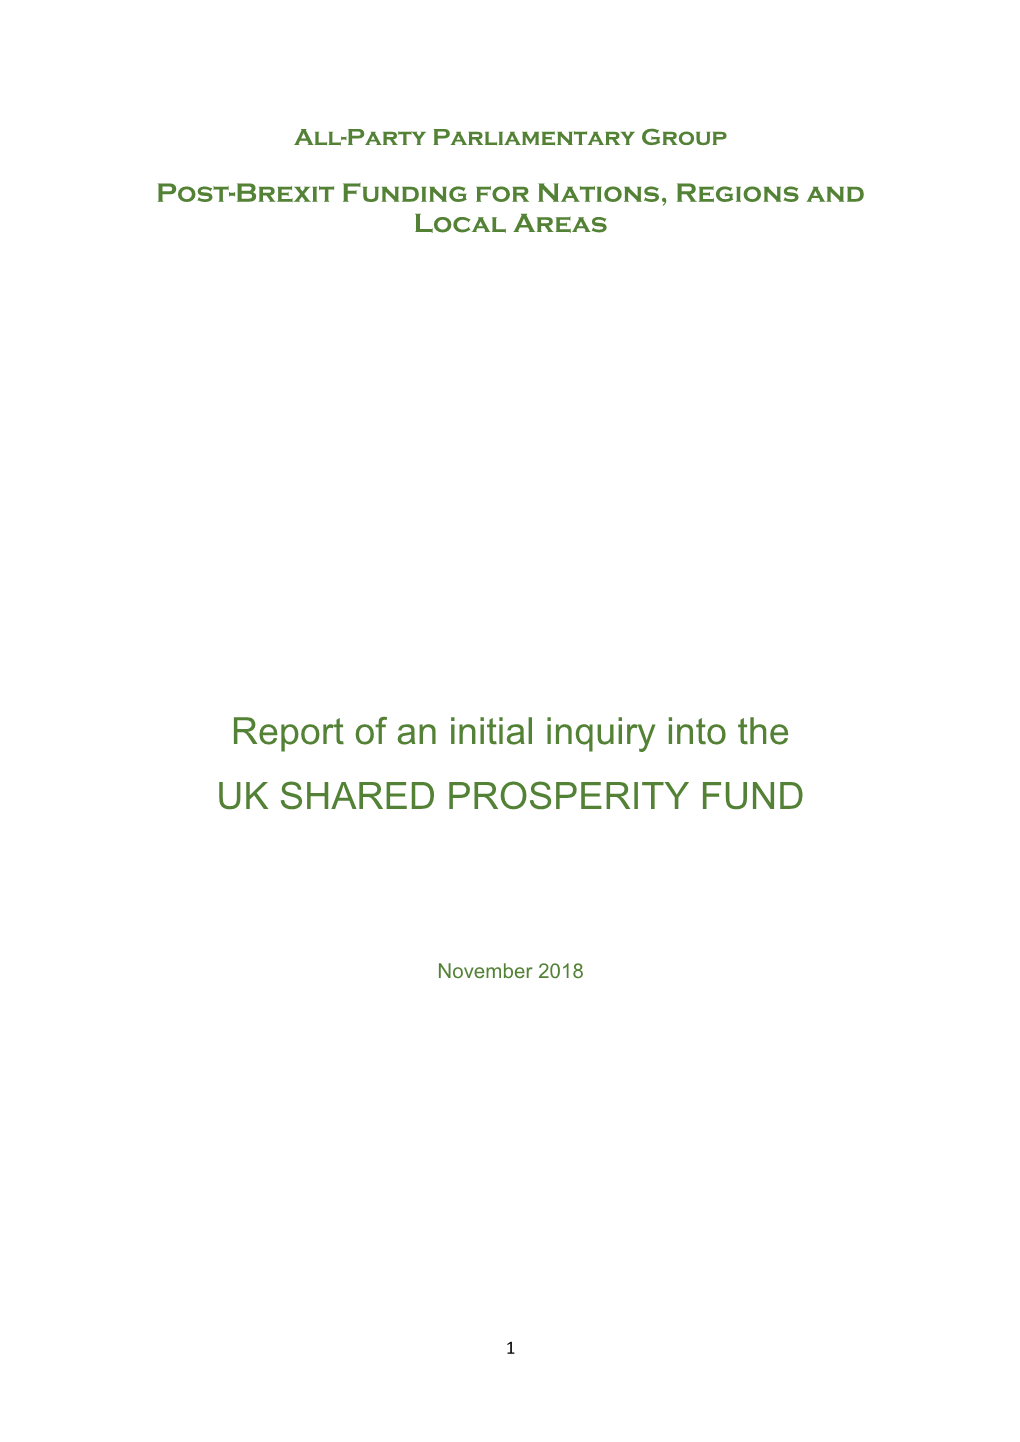 Report of an Initial Inquiry Into the UK SHARED PROSPERITY FUND